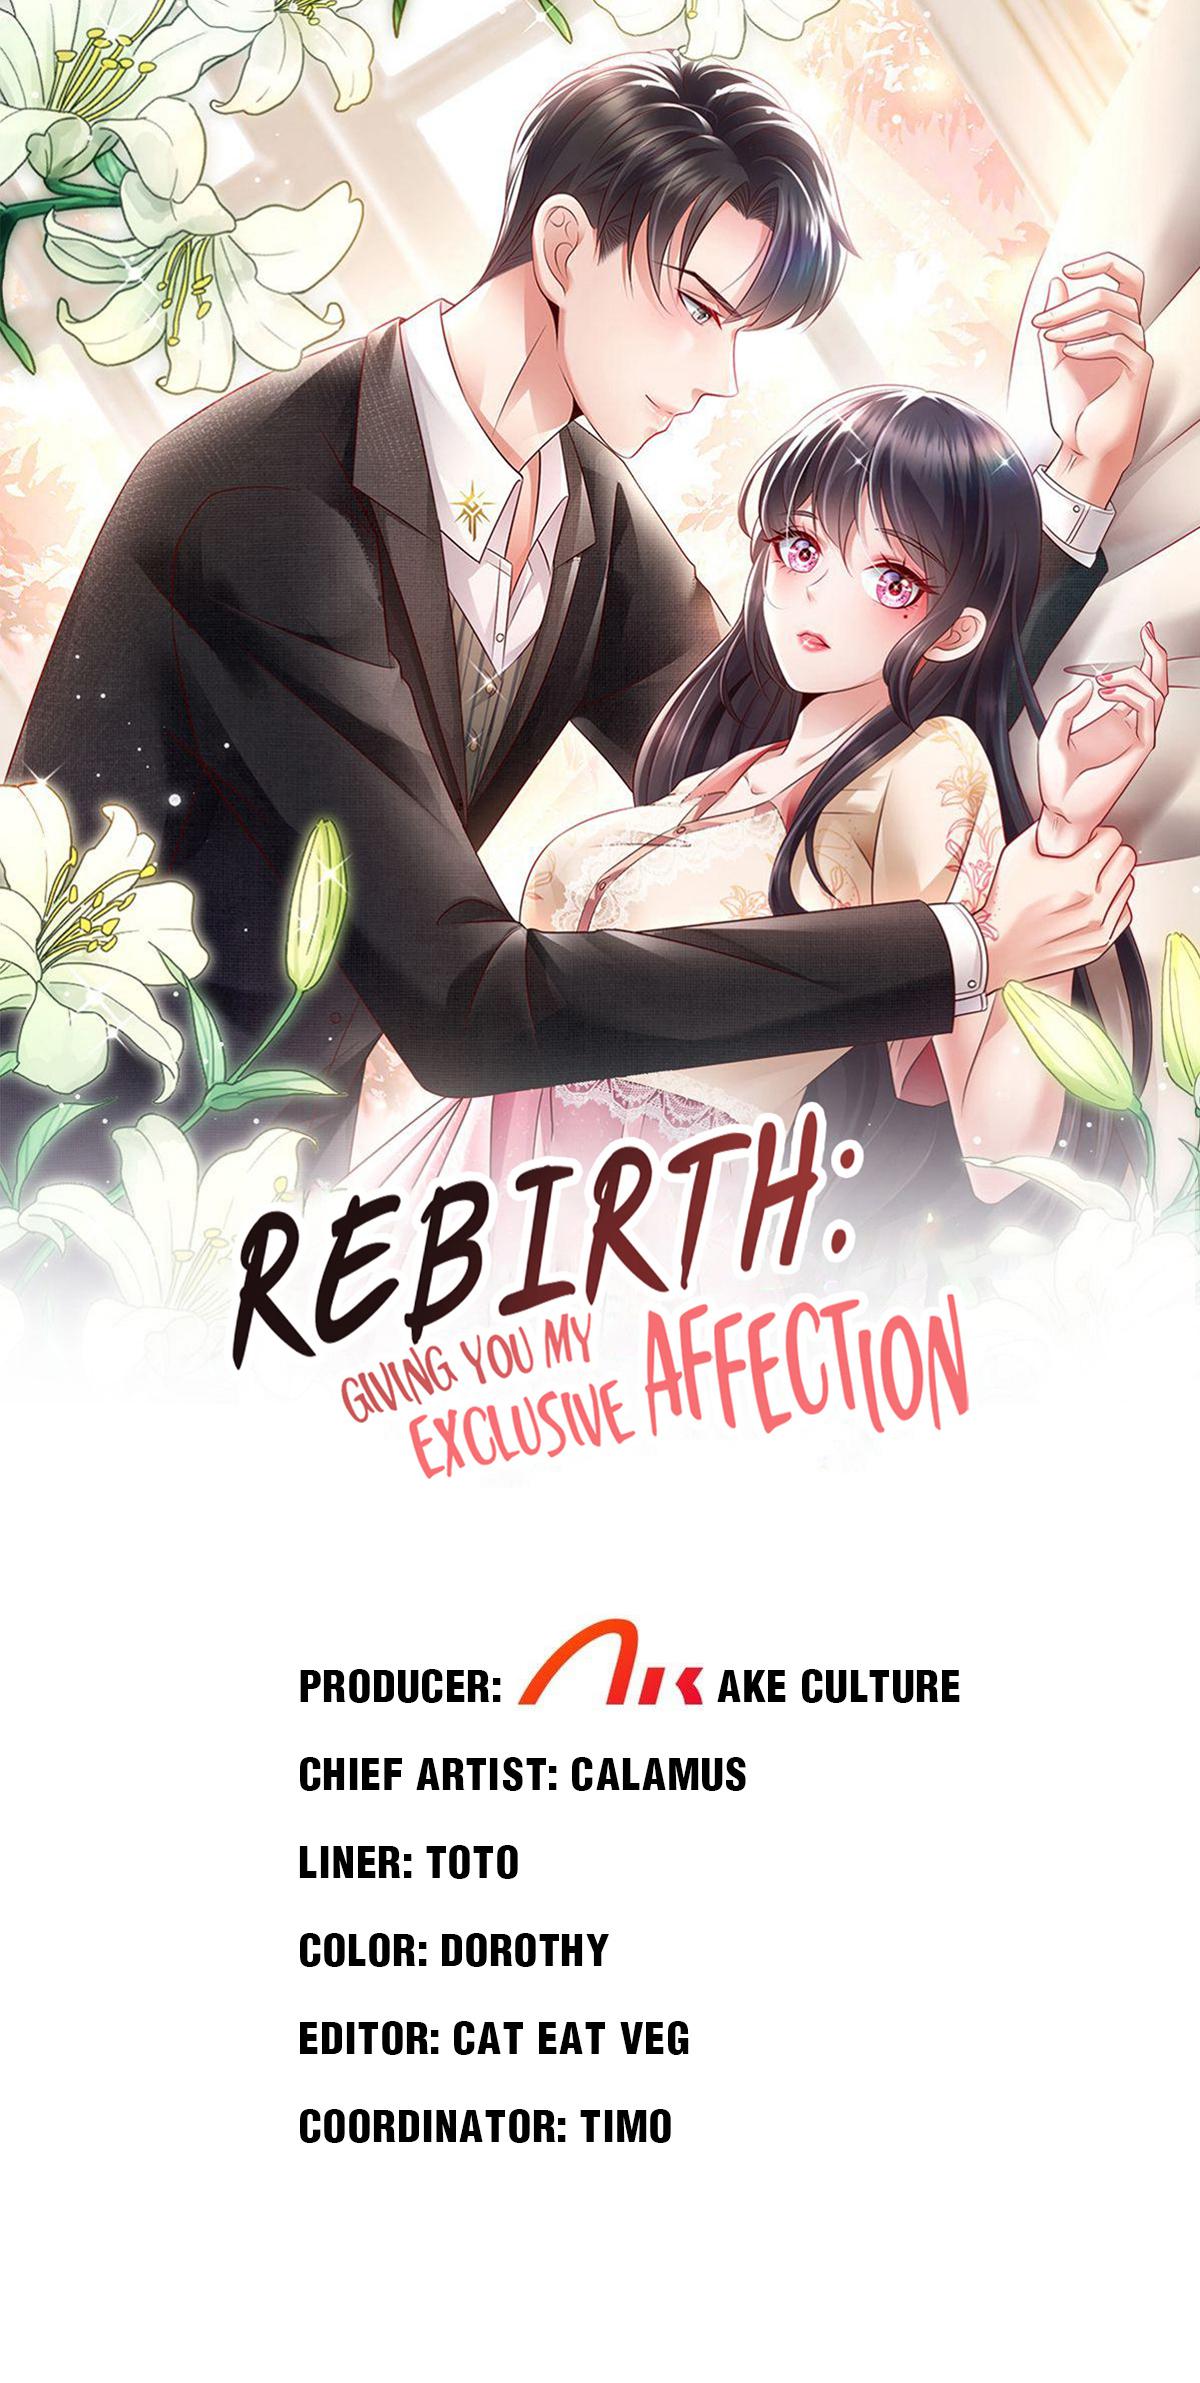 Rebirth: Giving You My Exclusive Affection 157